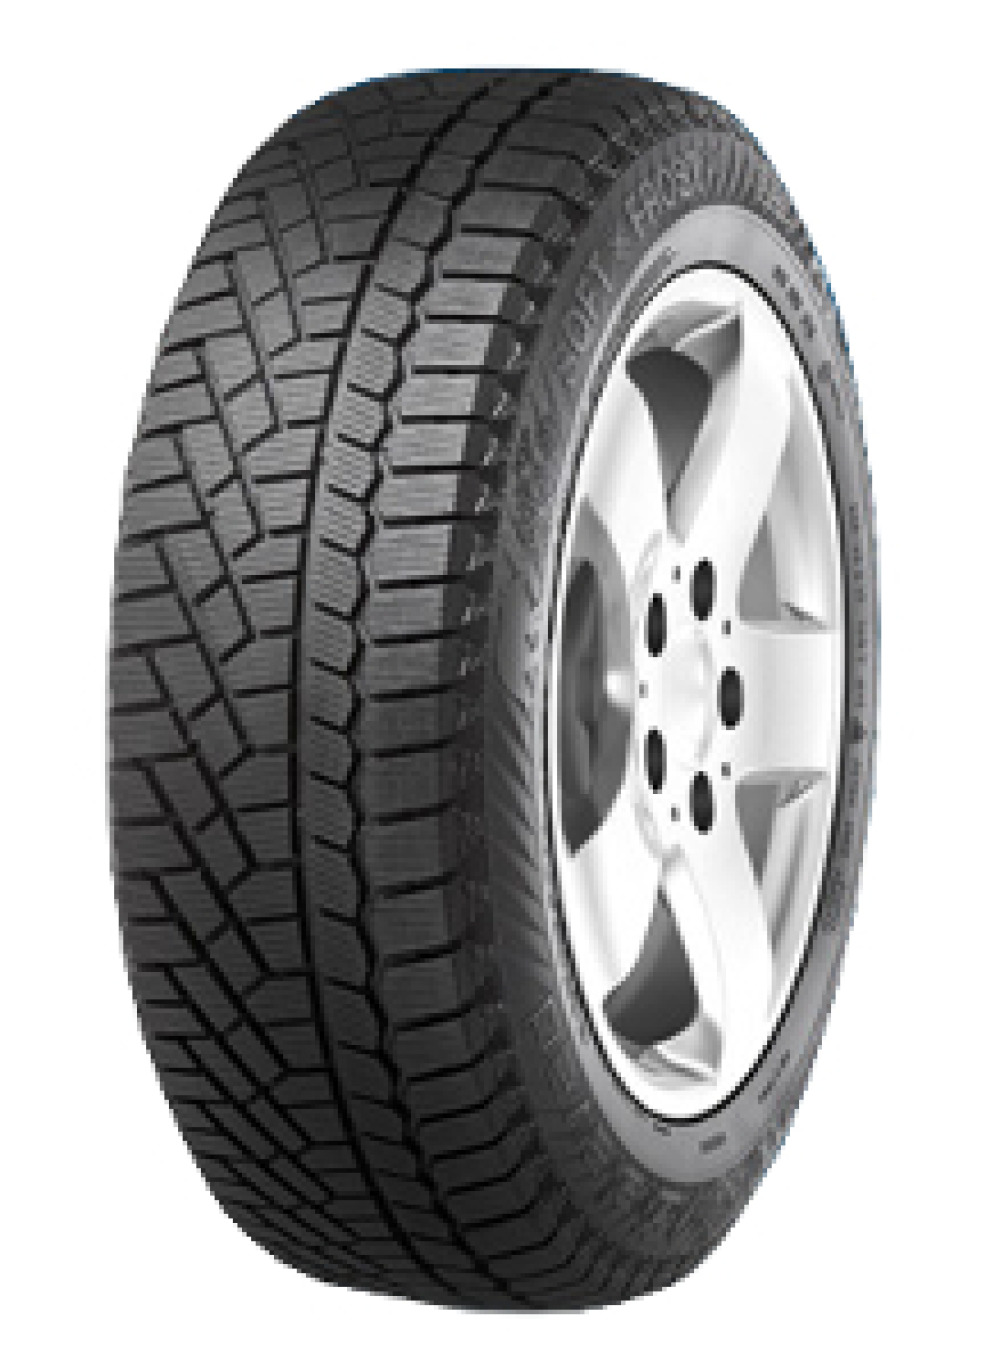 Image of Gislaved Soft*Frost 200 ( 175/65 R15 88T XL, Nordic compound )